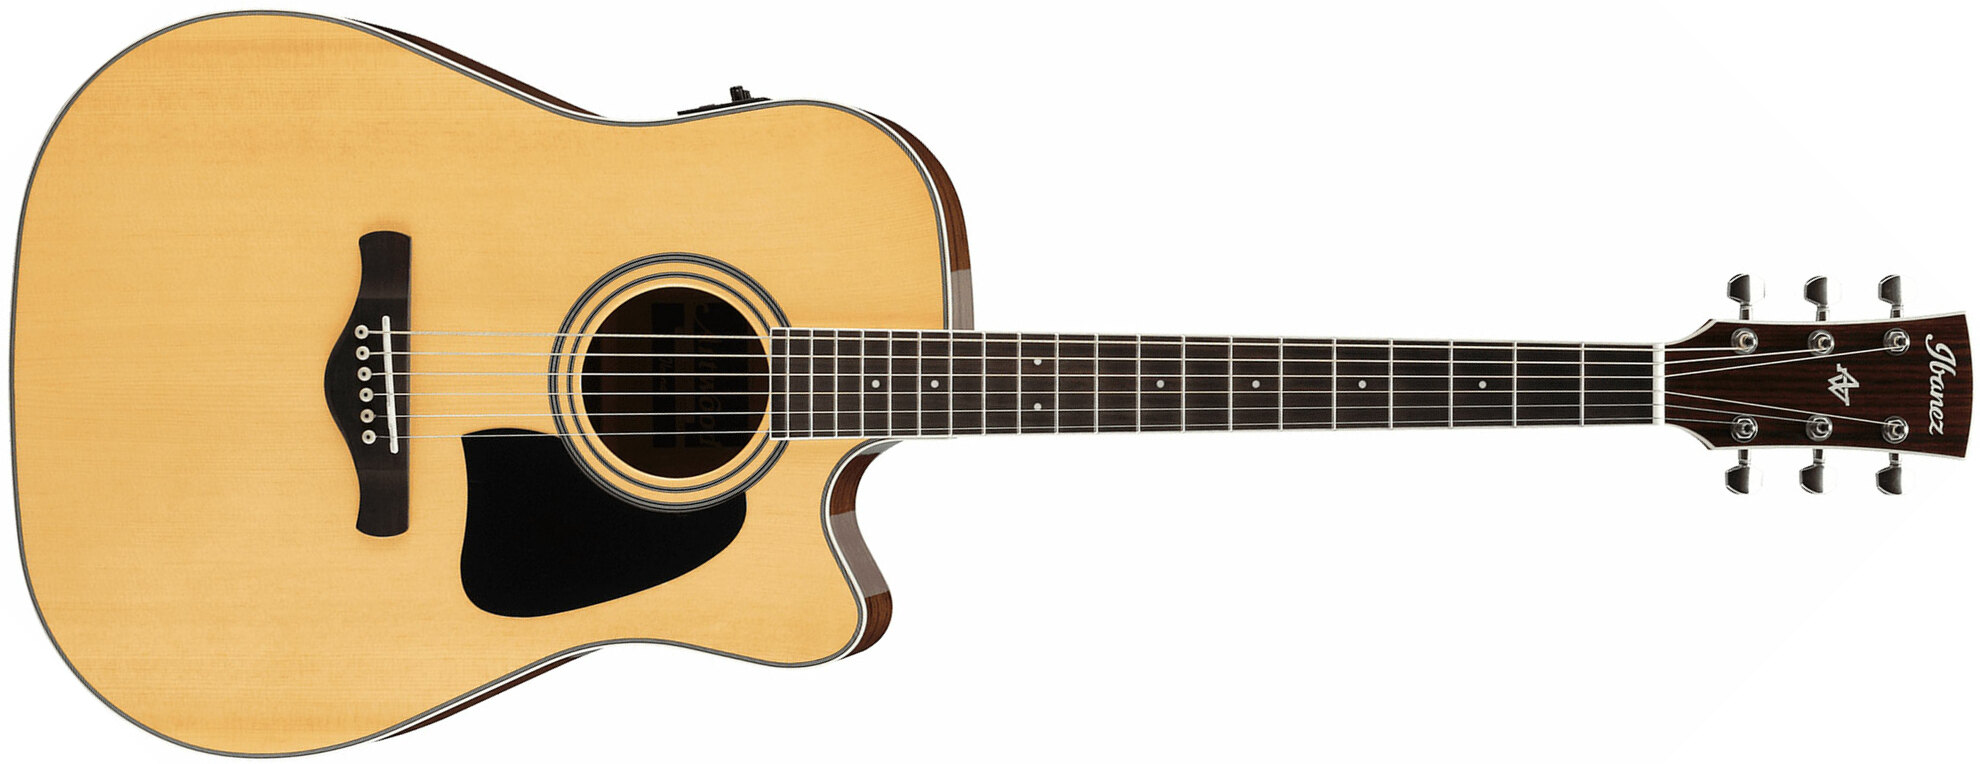 Ibanez Aw70ce Nt Artwood Dreadnought Cw Epicea Okoume Ova - Natural - Electro acoustic guitar - Main picture